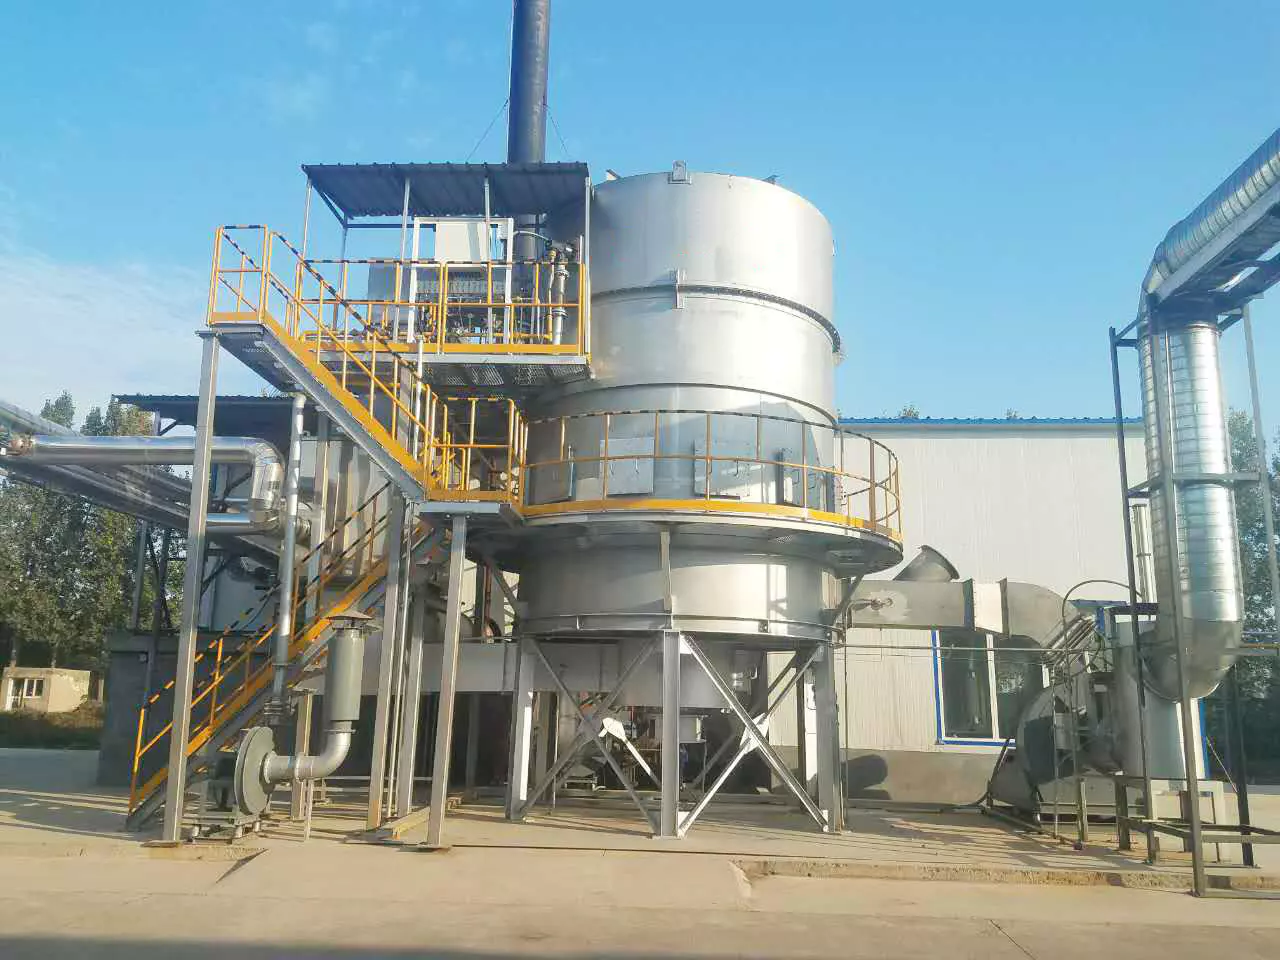 What is a Regenerative Thermal Oxidizer Used for